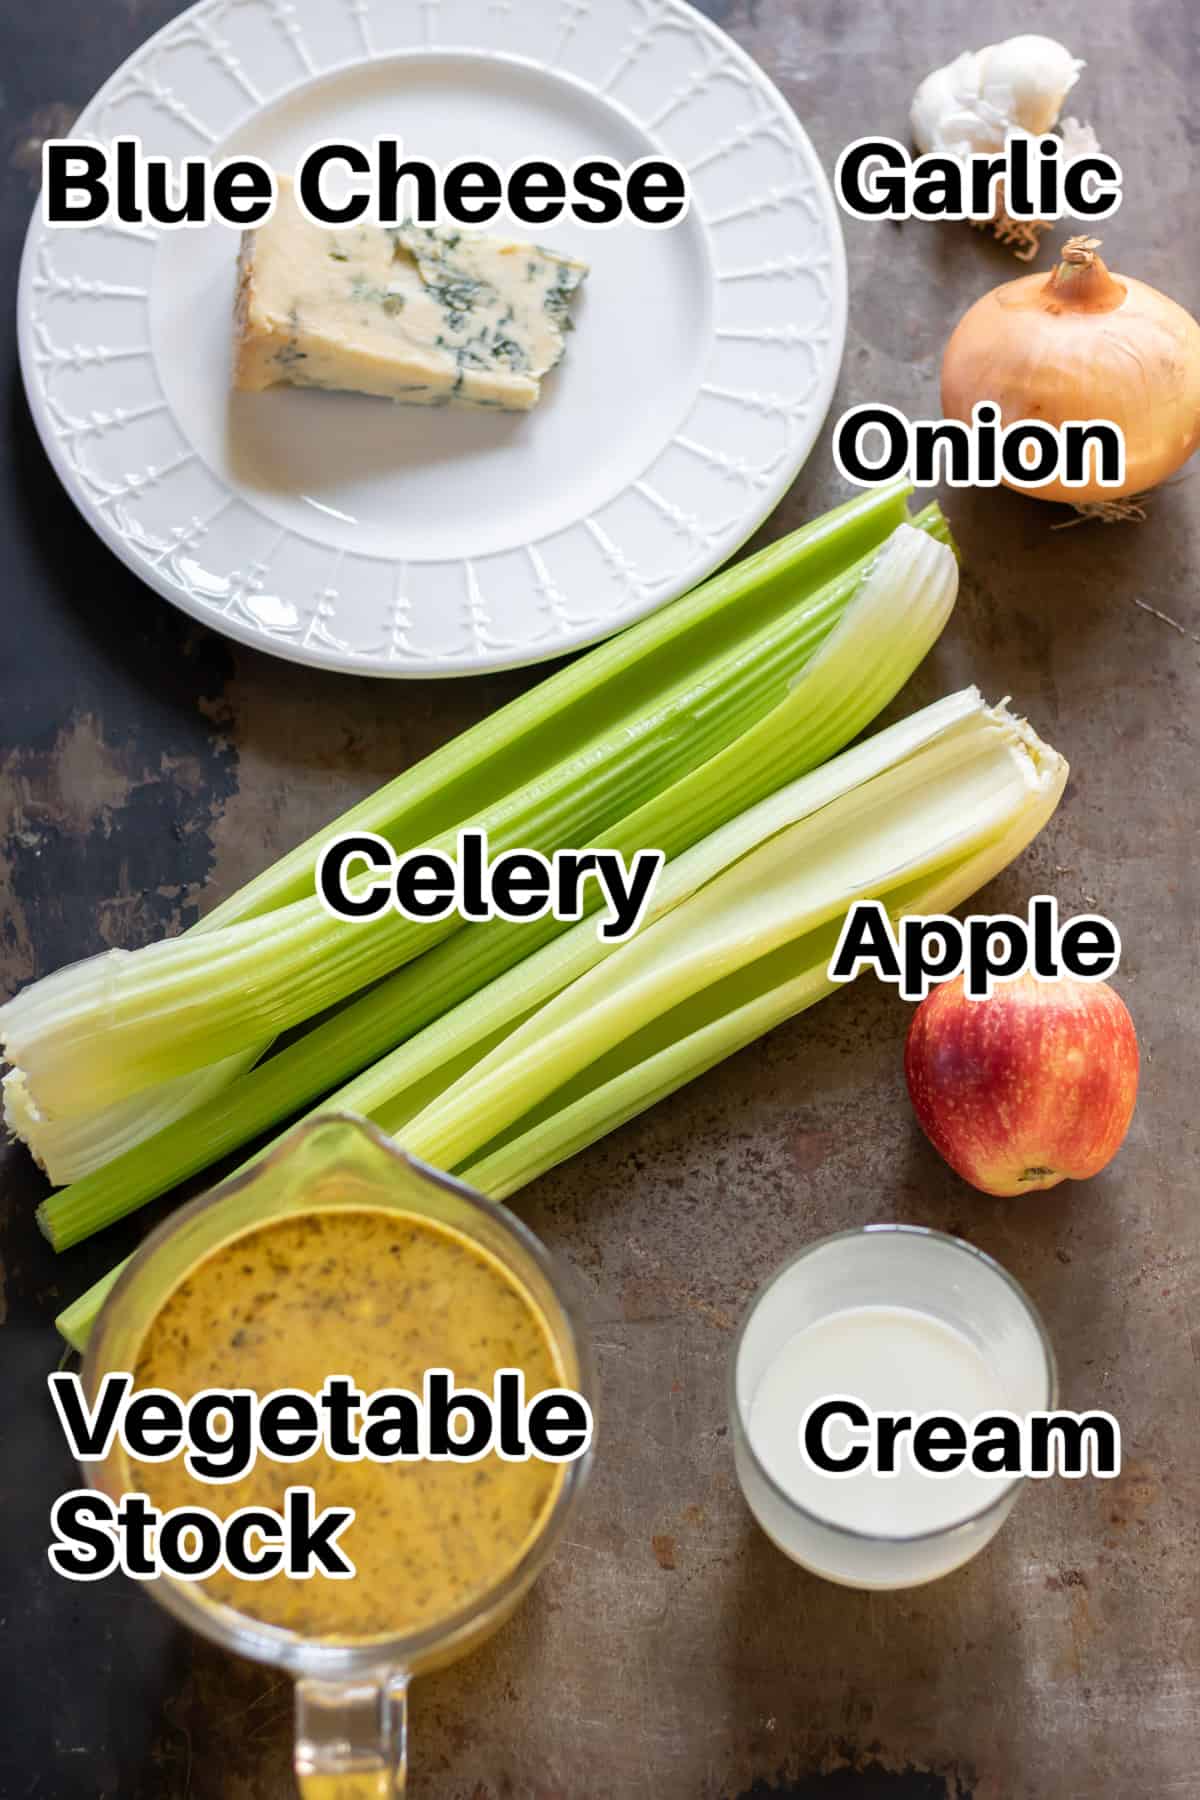 Labelled ingredients on a table.